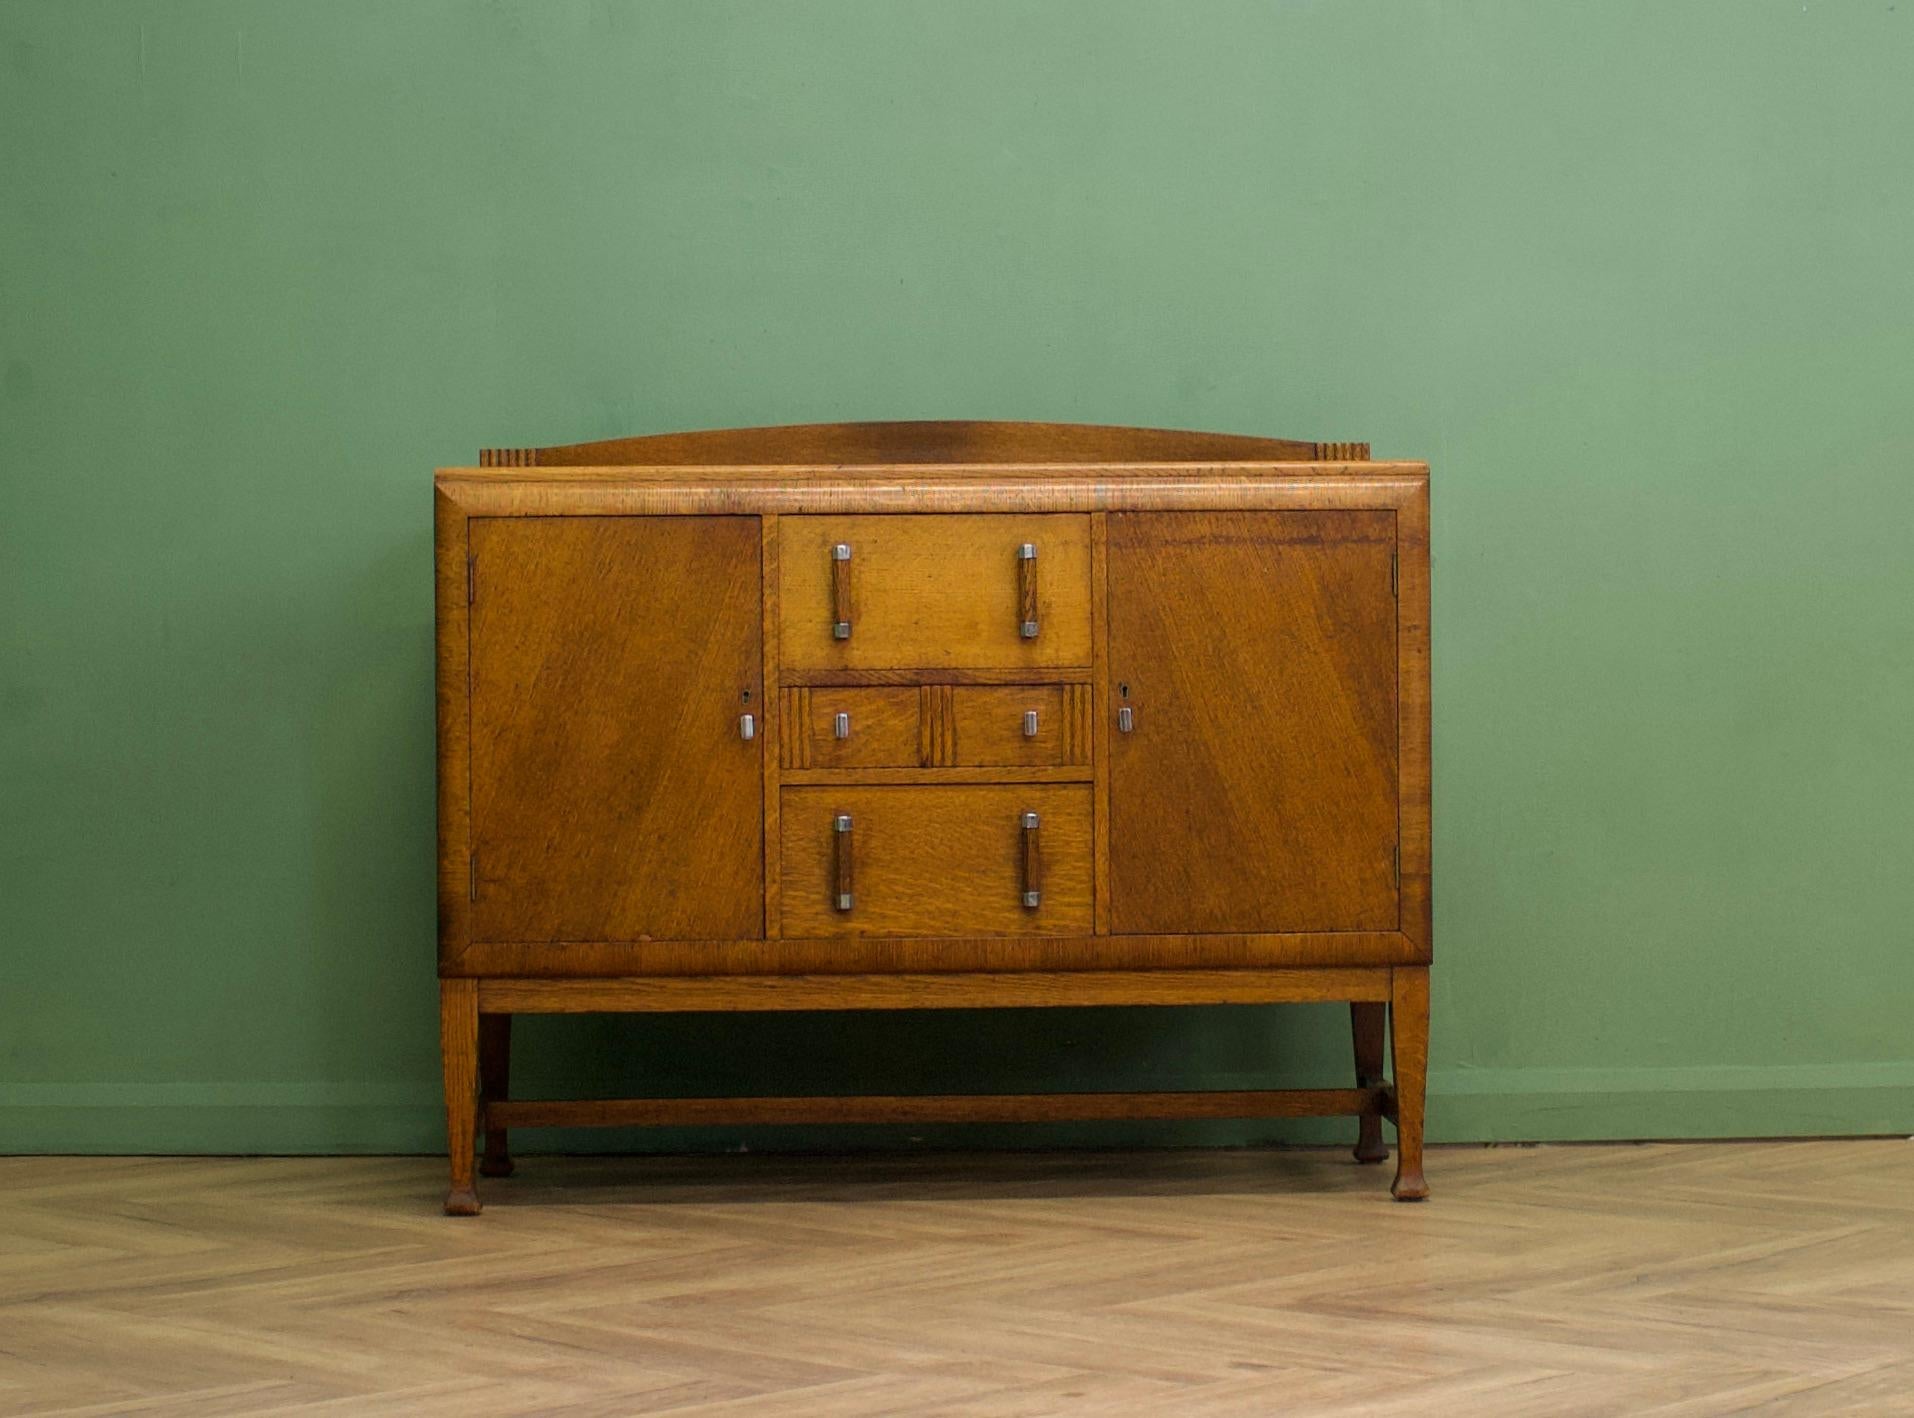 A high quality, dark oak Art Deco sideboard, circa 1930's-1940s
This piece is heavy and sturdy 
 
Featuring two drawers and two cupboards with shelves

